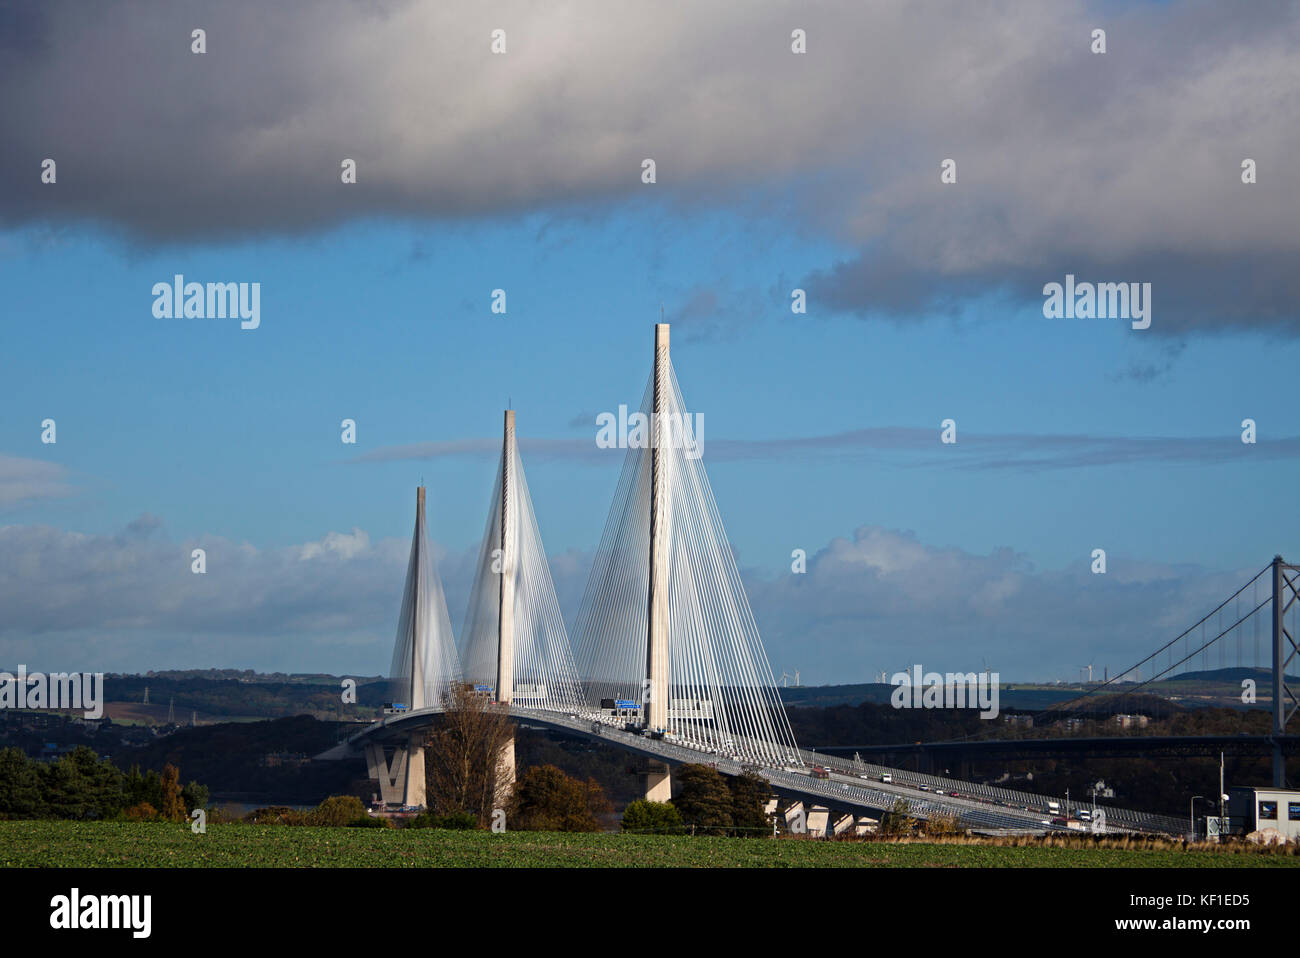 Edinburgh, South Queensferry, Scotland, UK. 25th Oct, 2017. UK Weather. Moody skies with wind keeping the clouds moving and sunshine around the new Queensferry Crossing. Stock Photo